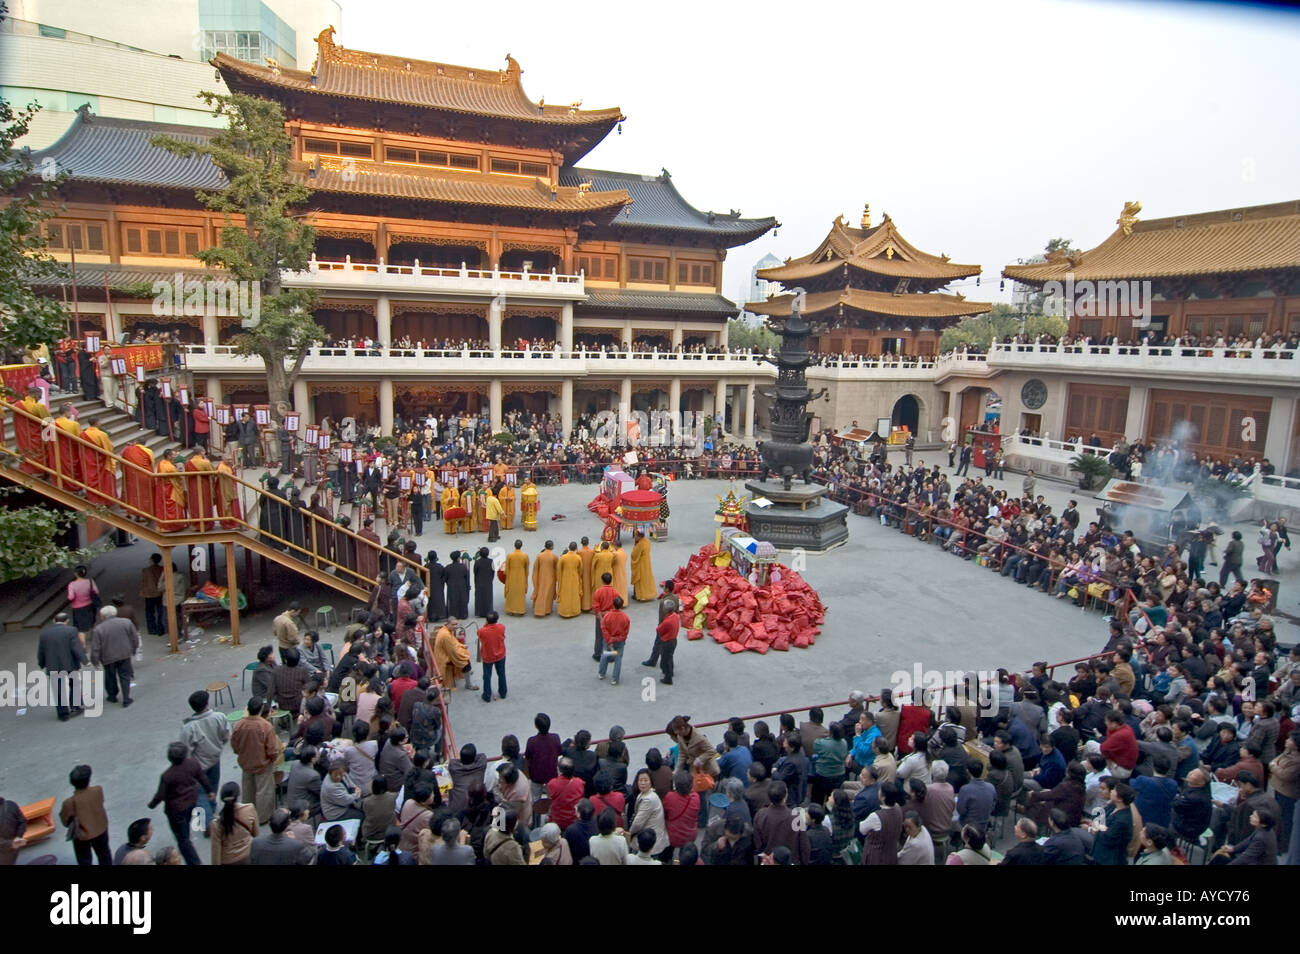 Crowded Buddhist religious procession at Jingan Temple, in Shanghai, China. Stock Photo